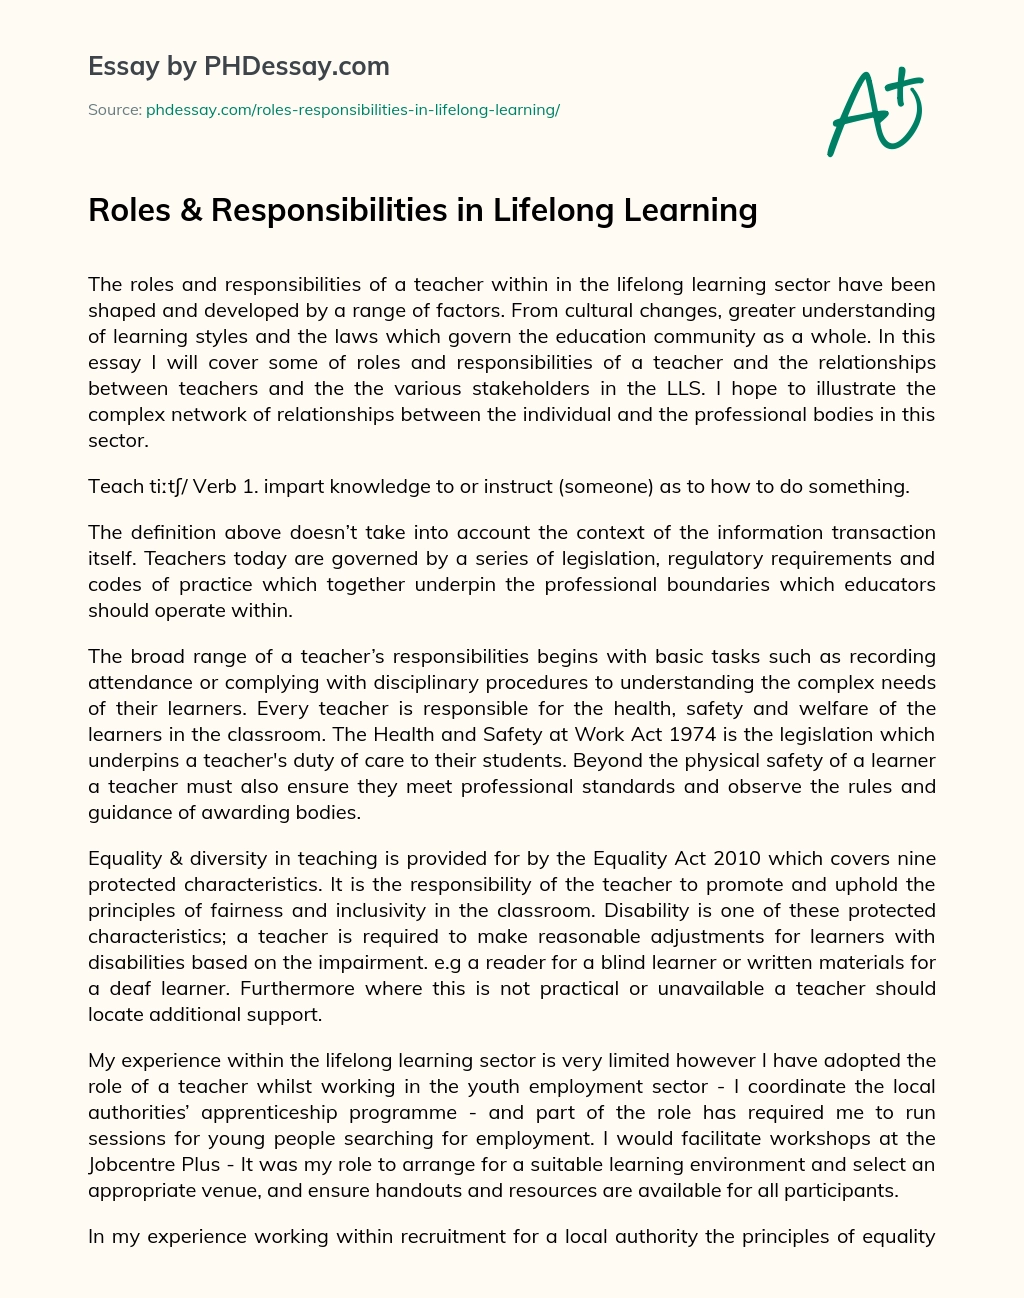 Roles & Responsibilities in Lifelong Learning essay